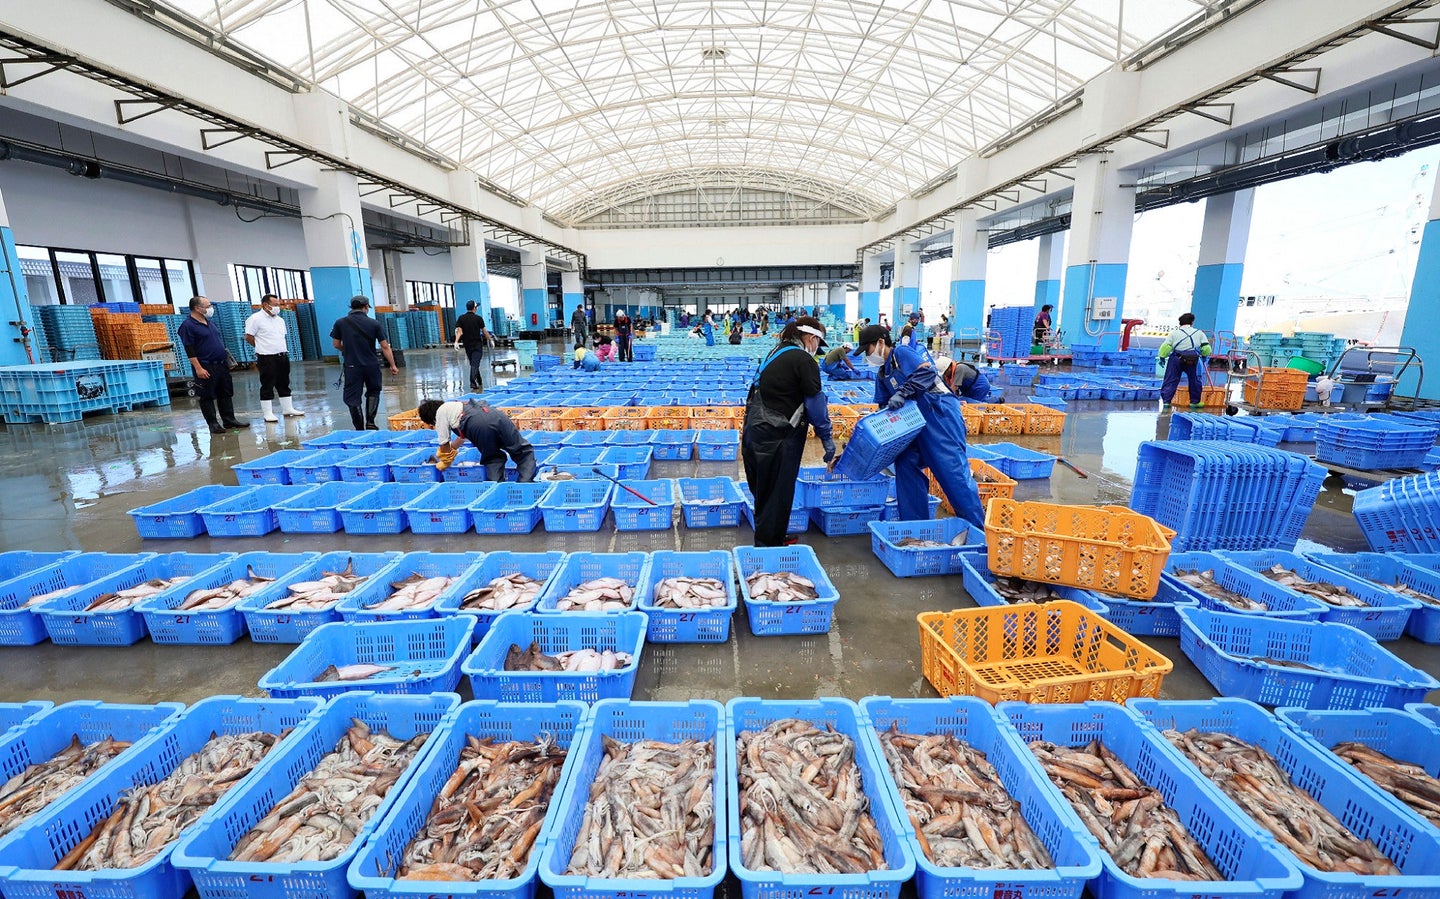 Blue bins of fish and other seafood caught near the Fukushima nuclear plant in Japan